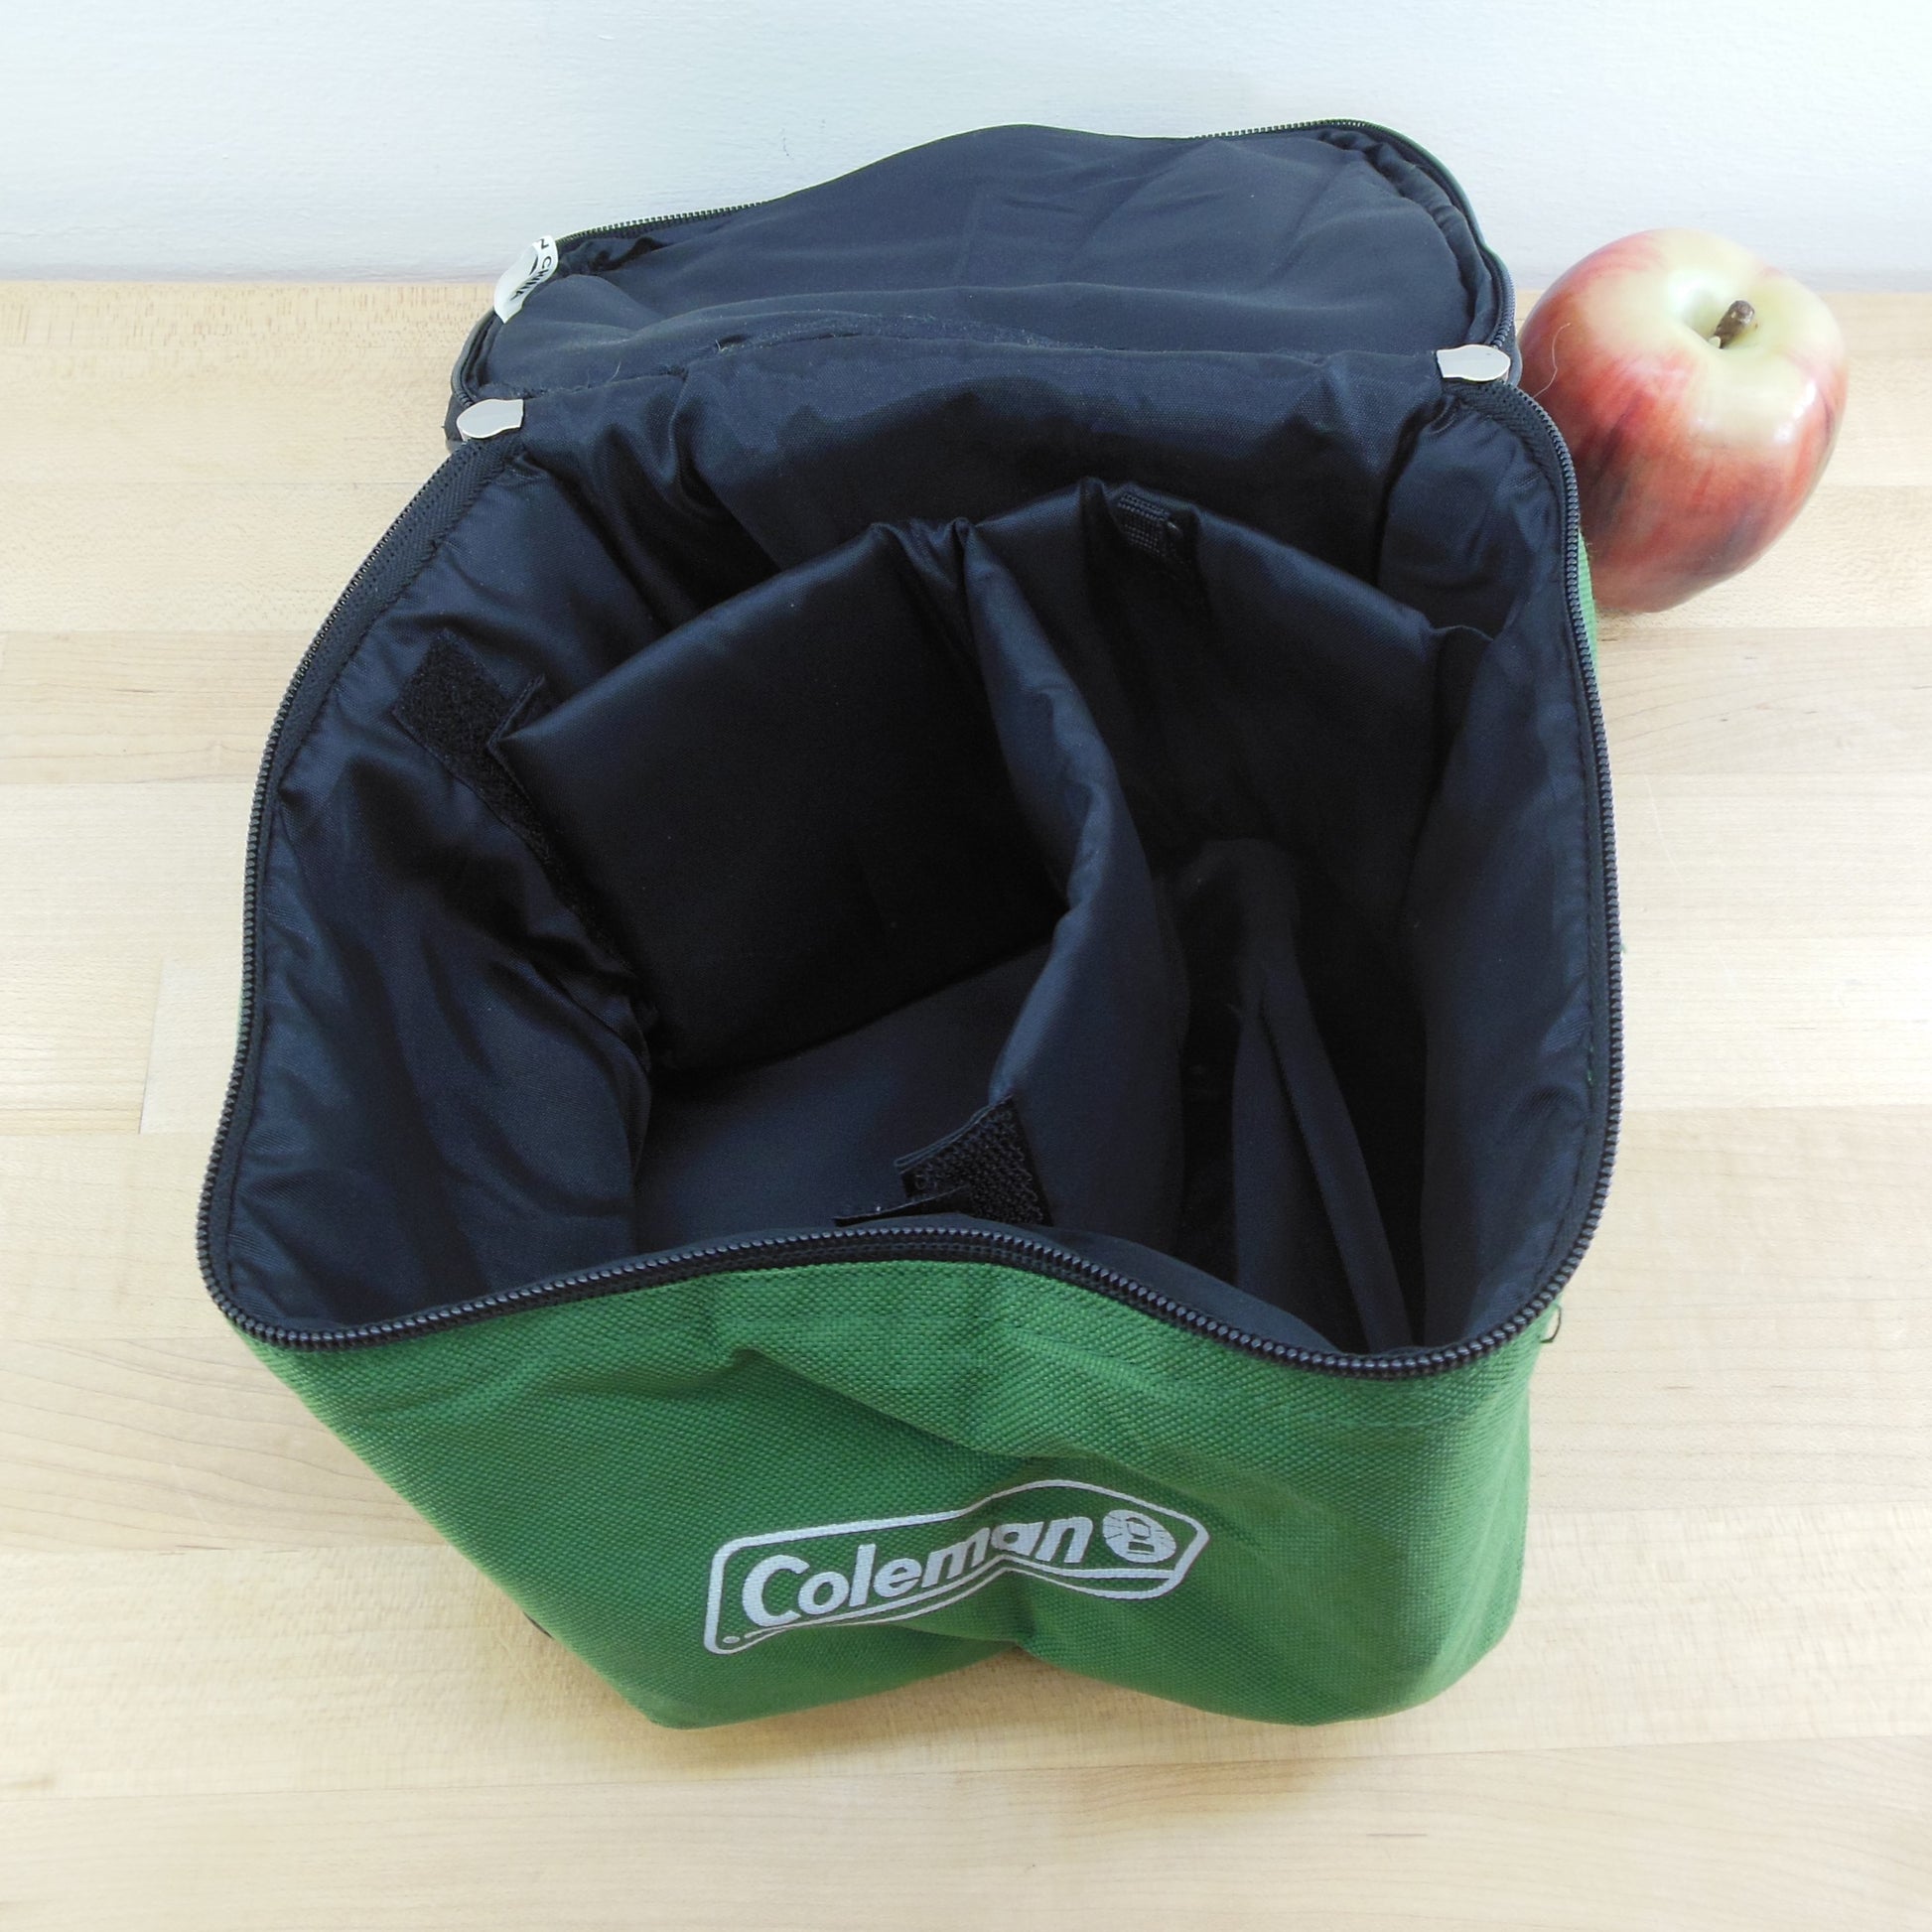 Coleman Thermal Insulated Soft Lunch Bag Green used